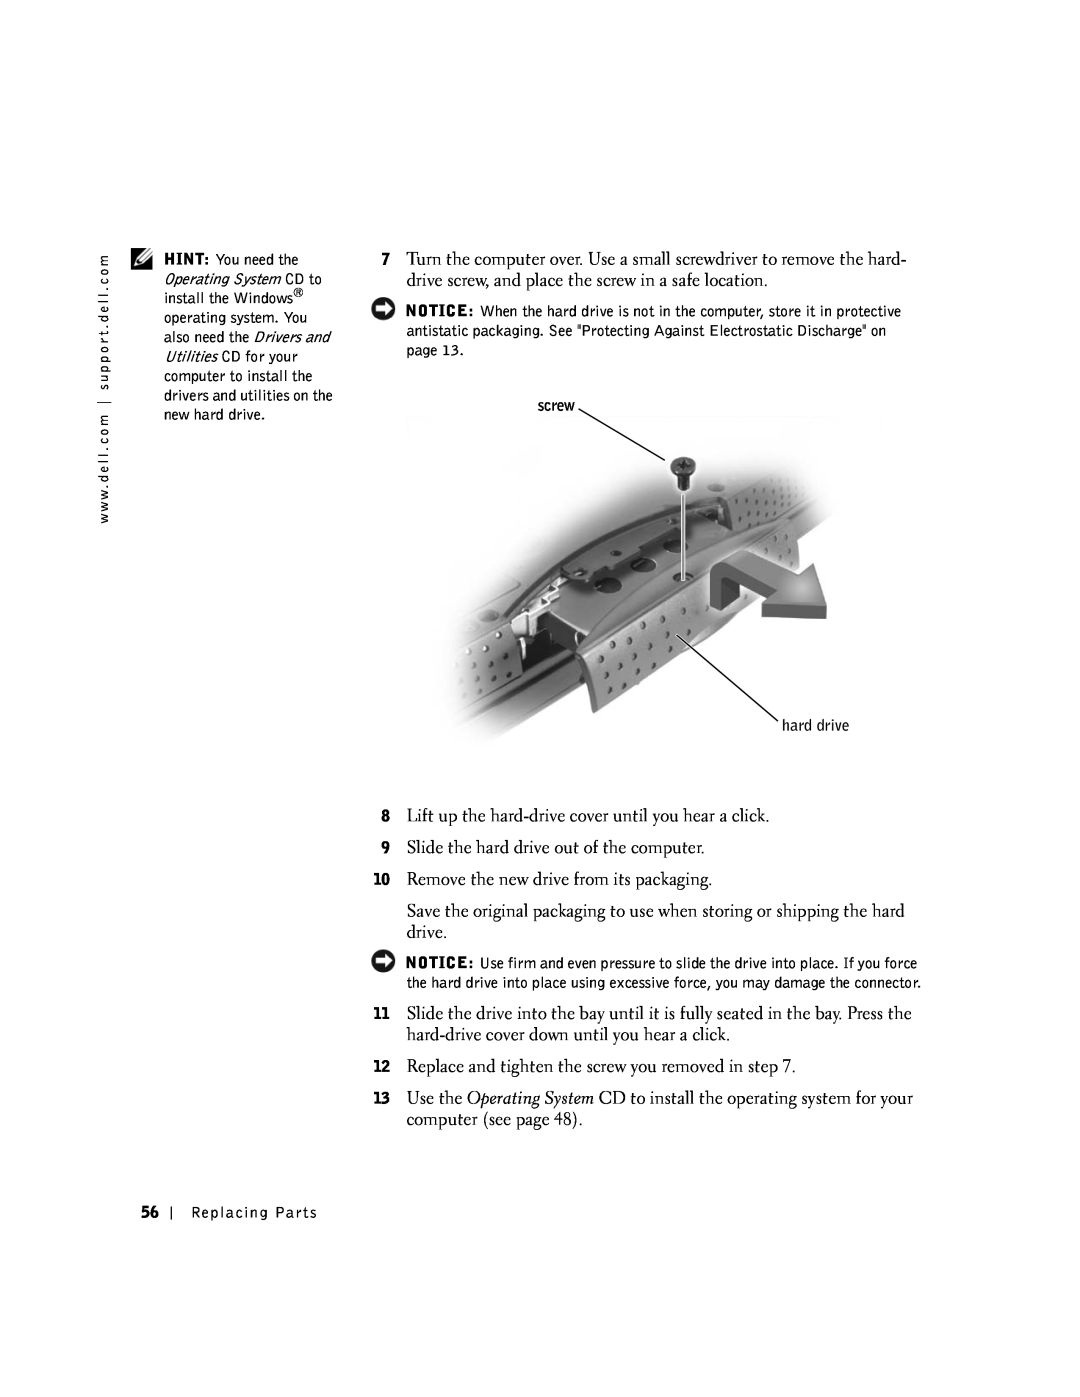 Dell 100N owner manual Lift up the hard-drive cover until you hear a click 